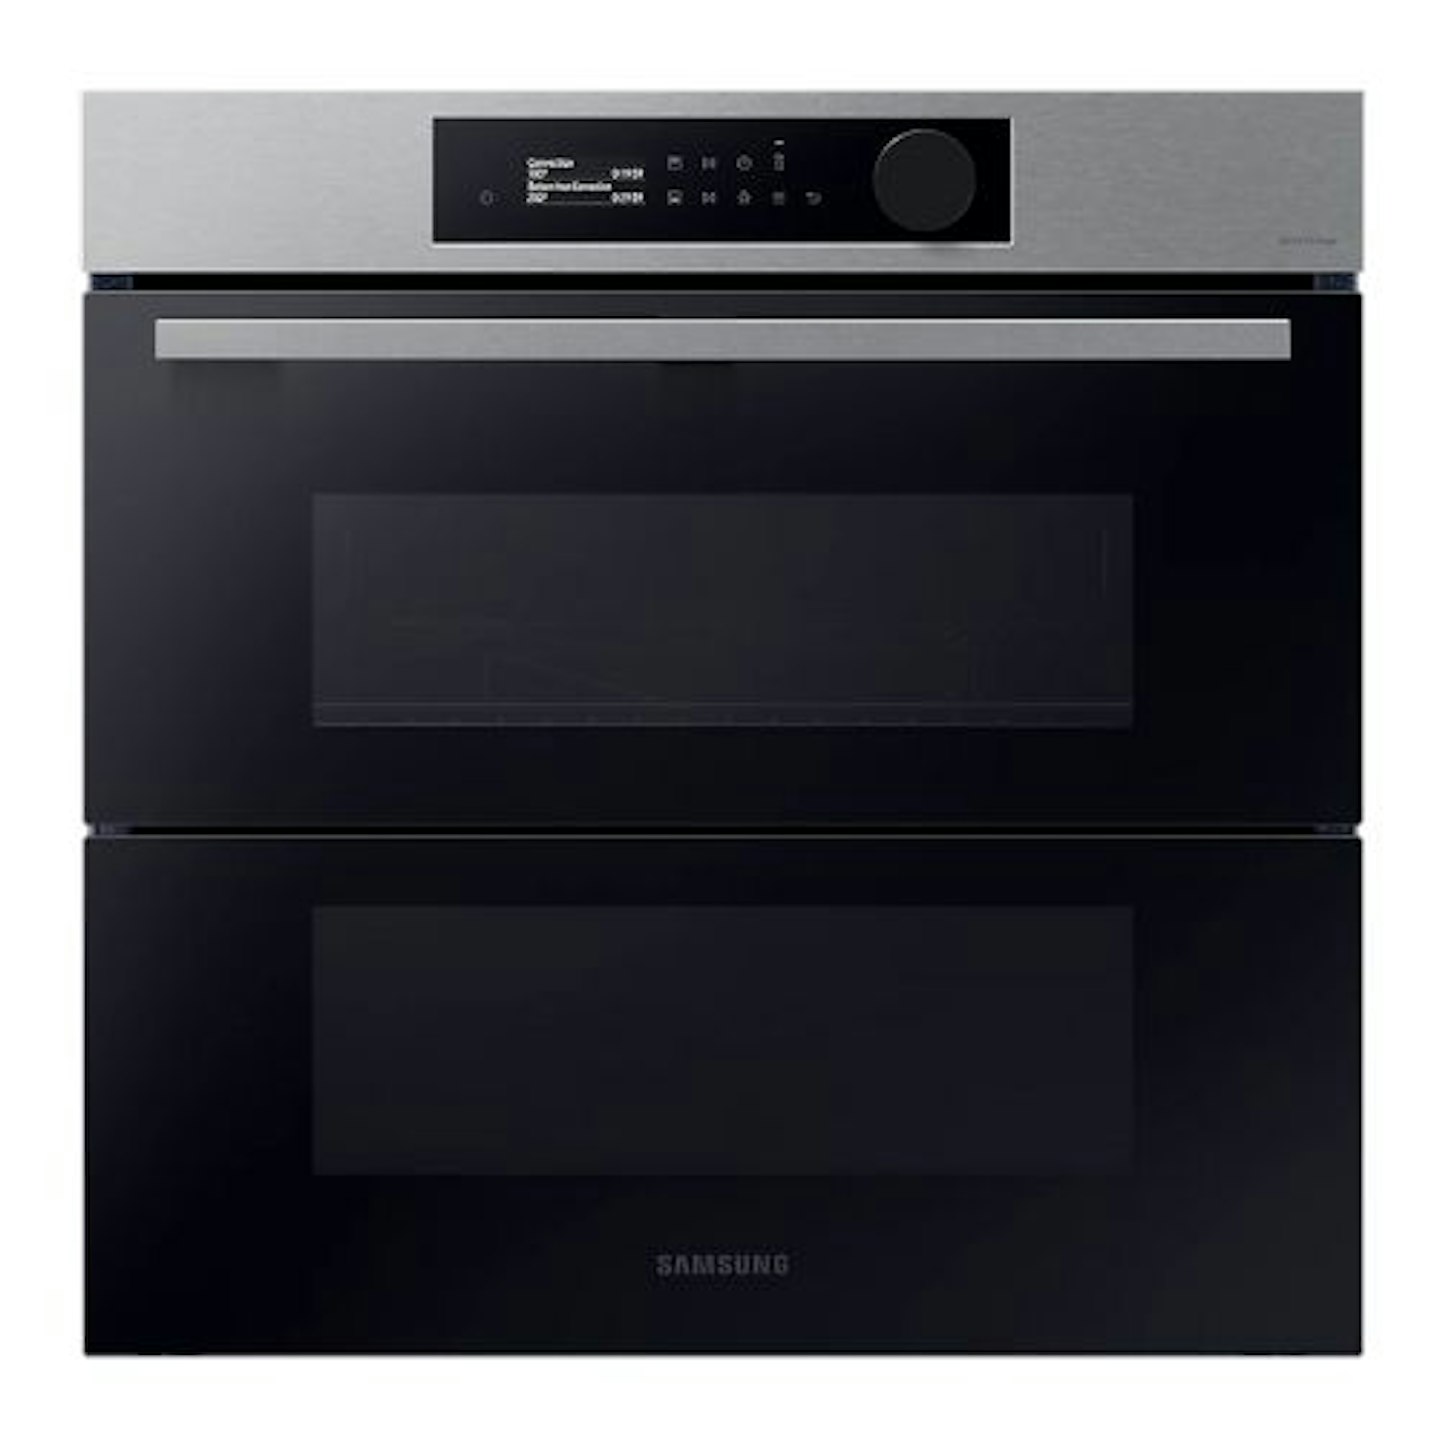 Samsung NV7B5755SAS Series 5 Smart Oven with Dual Cook Flex and Air Fry